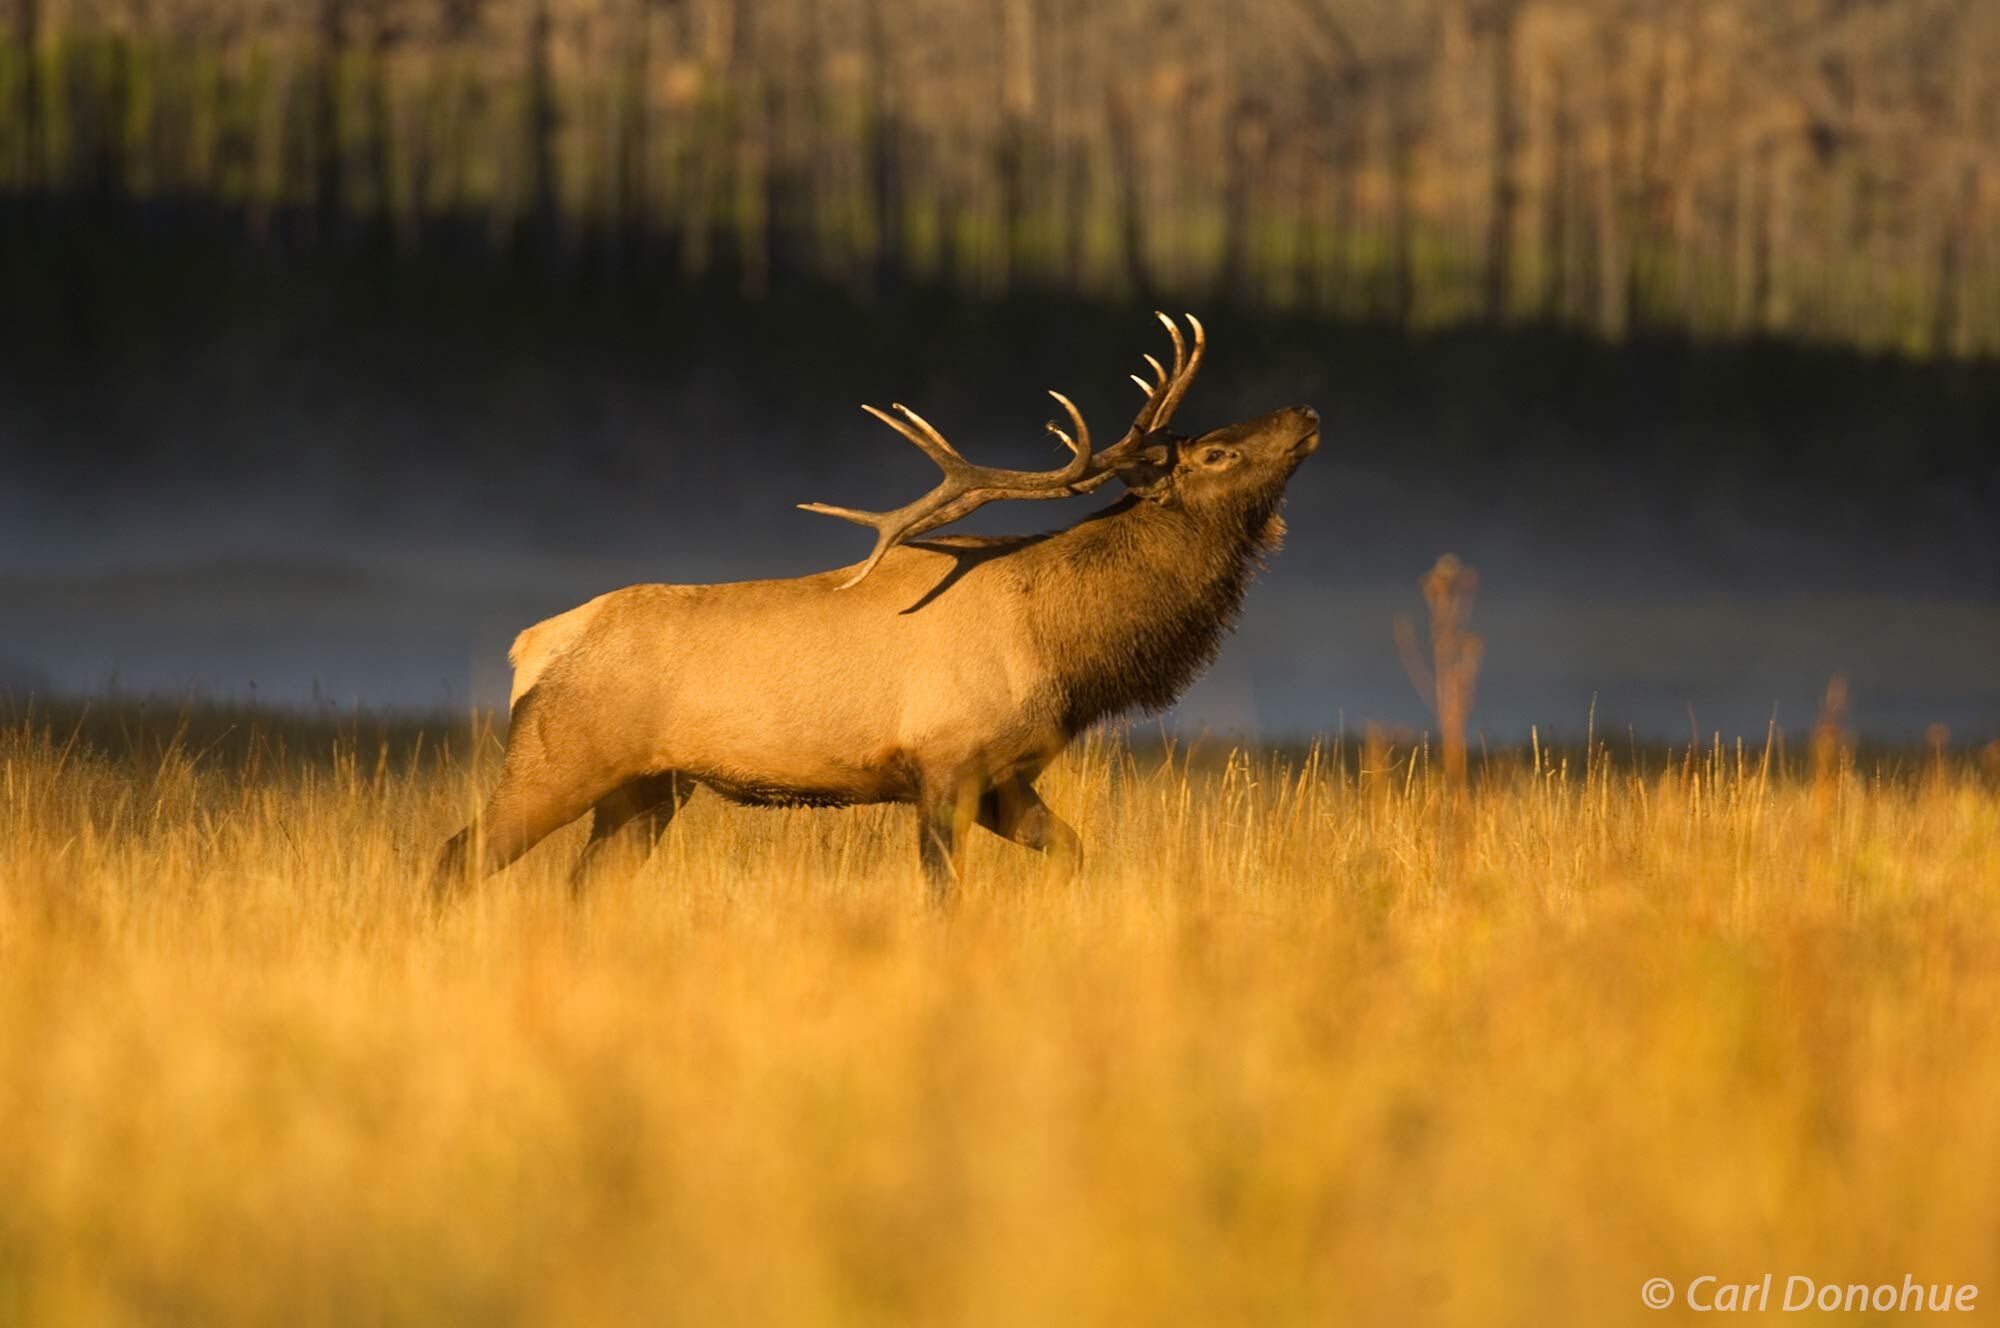 Bull elk posturing in front of his herd, early morning light, Madison River, Yellowstone National Park, Wyoming.